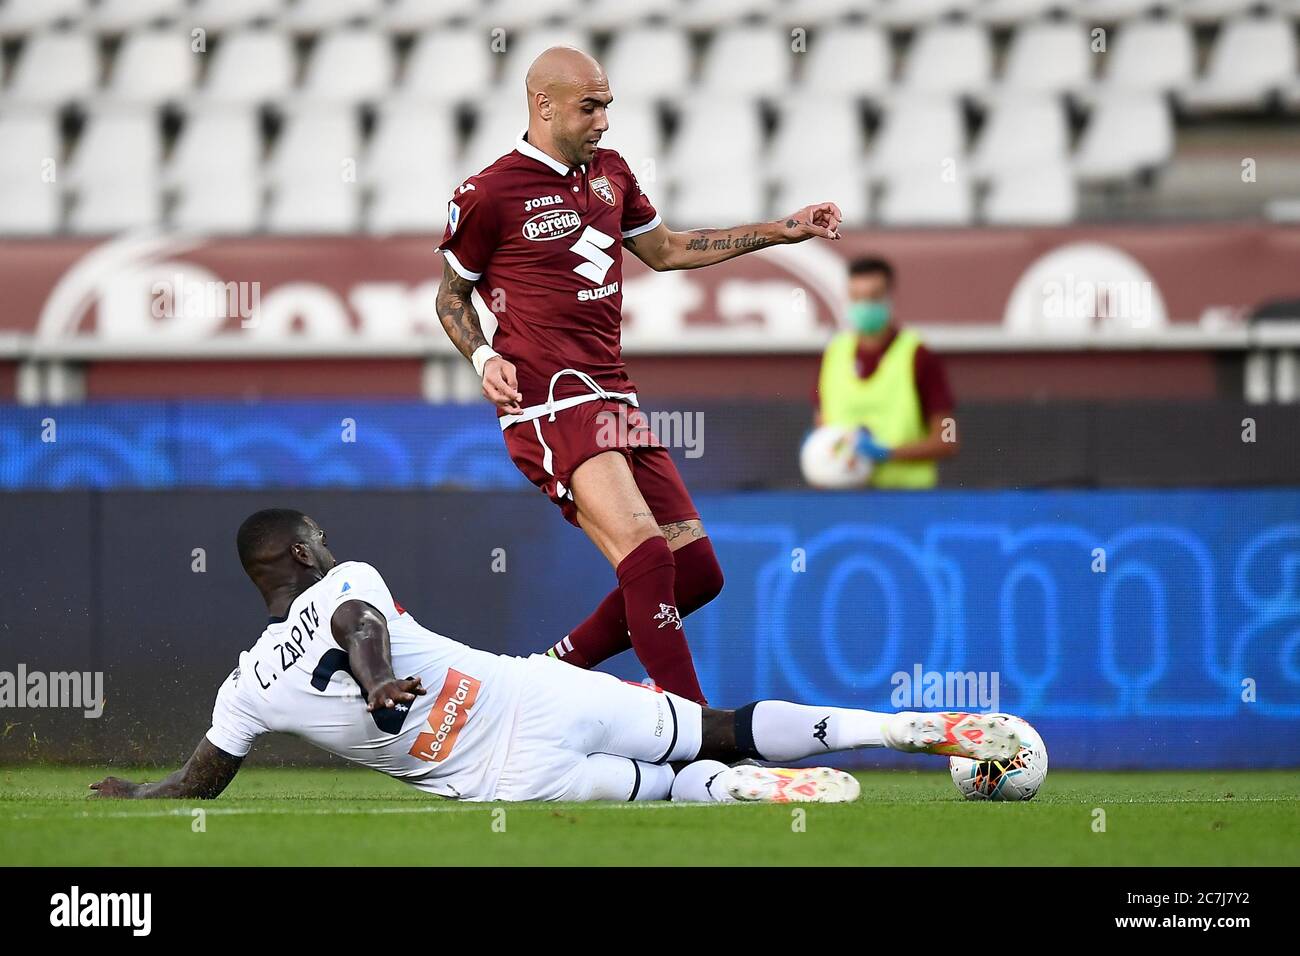 Turin, Italy - 16 July, 2020: Simone Zaza of Torino FC is tackled by Cristian Zapata of Genoa CFC during the Serie A football match between Torino FC and Genoa CFC. Torino FC won 3-0 over Genoa CFC. Credit: Nicolò Campo/Alamy Live News Stock Photo